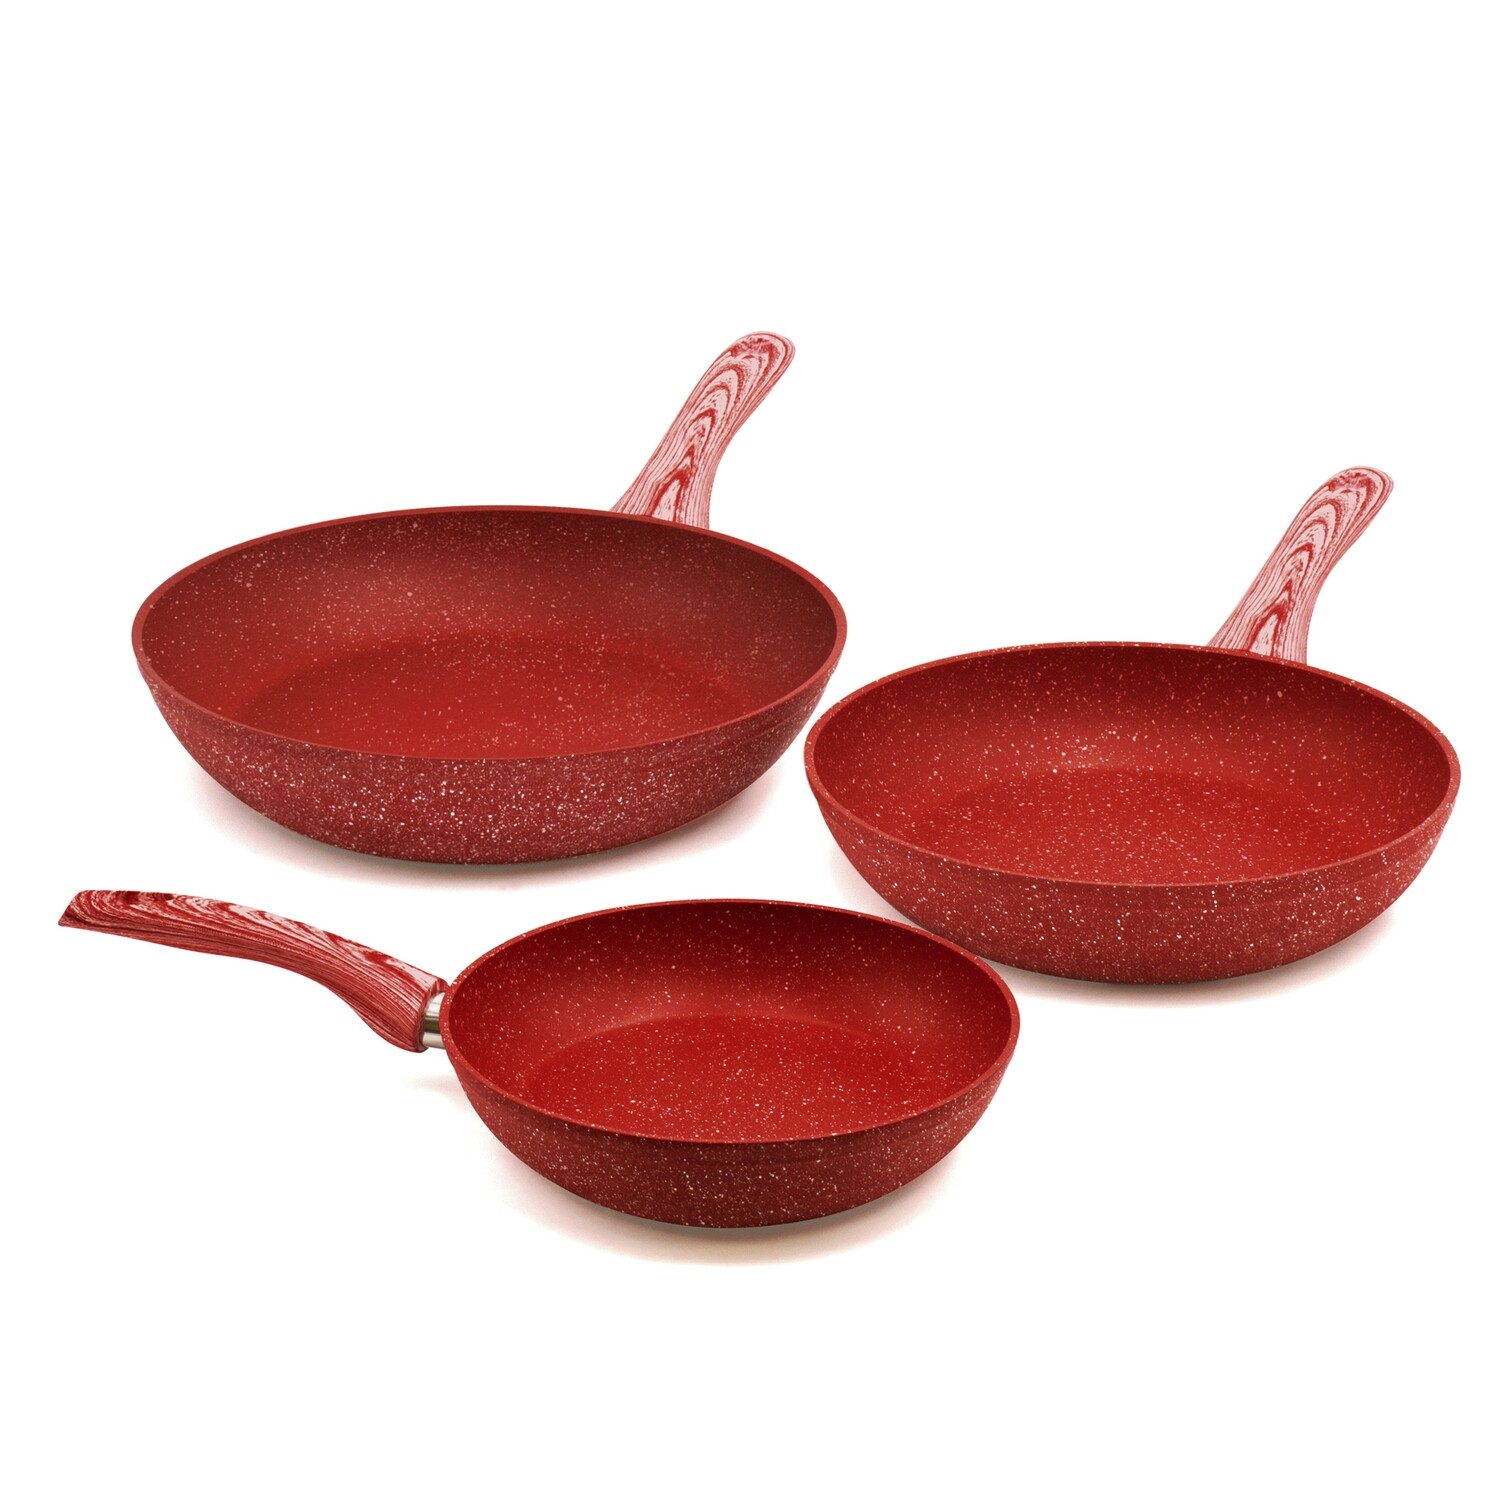 3 pieces cookware set 'Red Passion' with wood colour handles